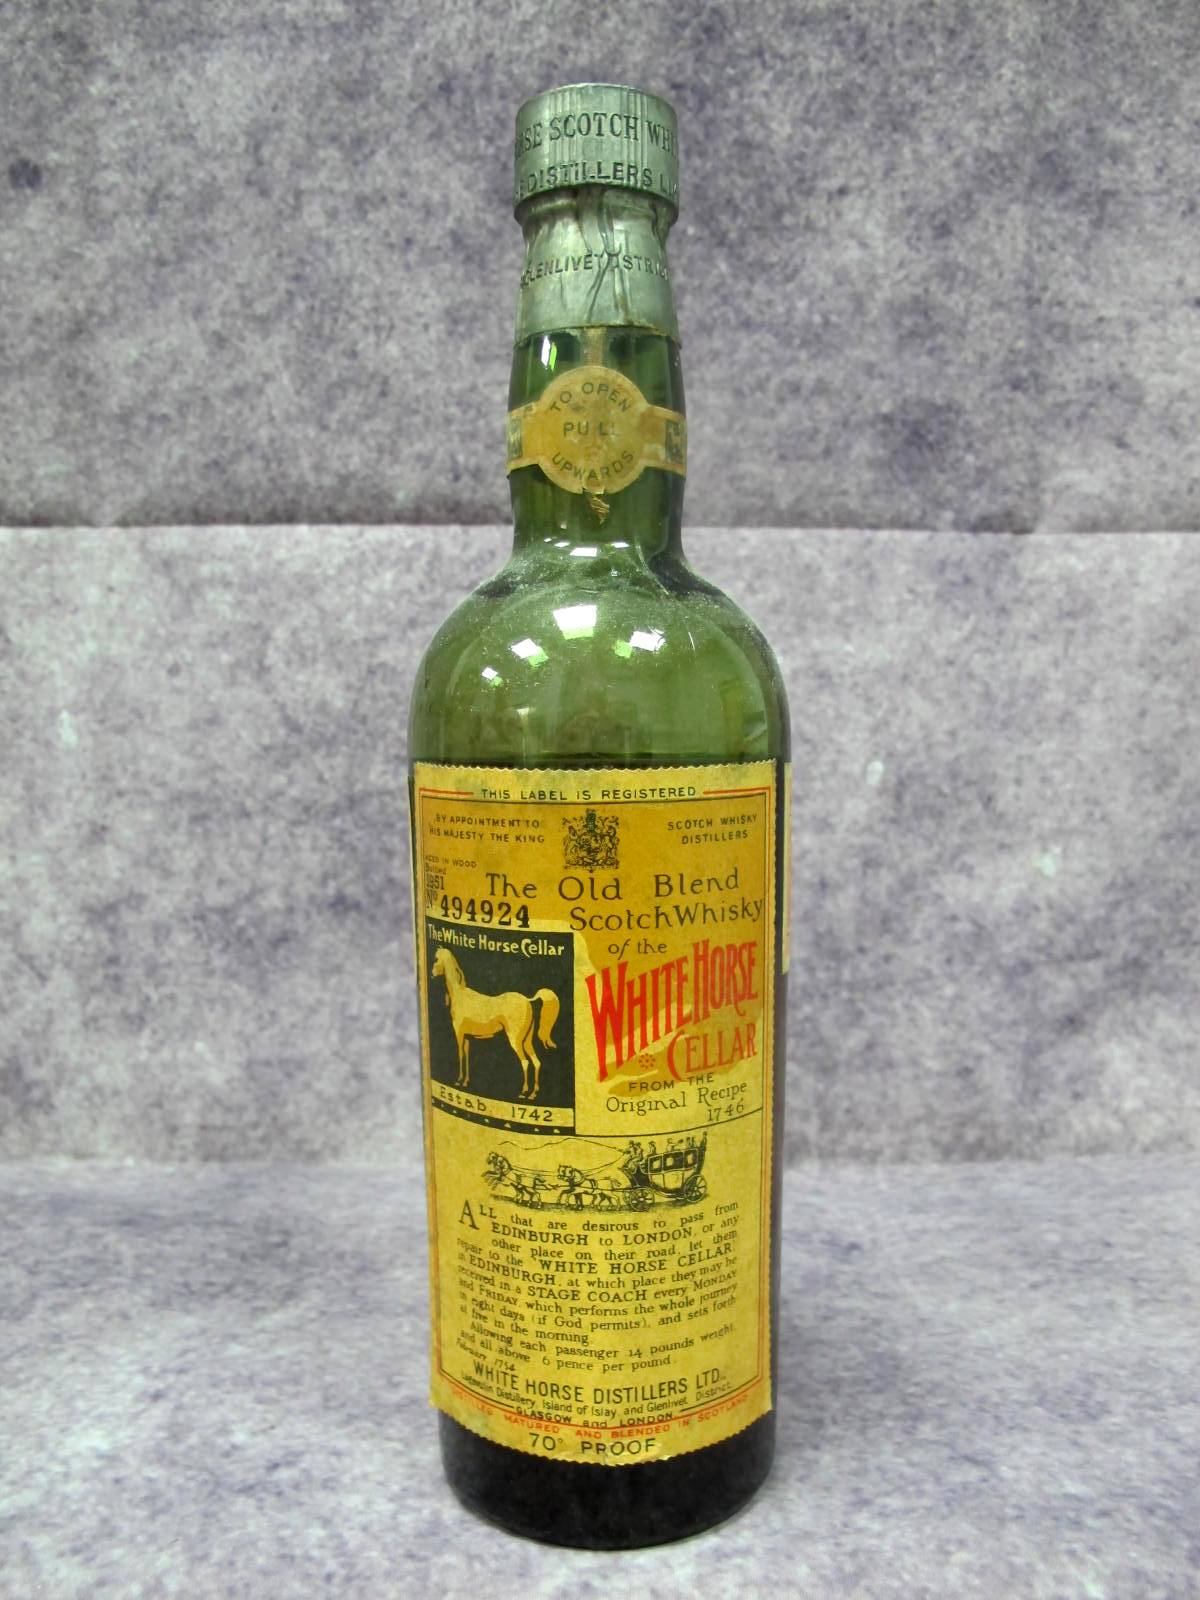 Whisky - The Old Blend Scotch Whisky Of The White Horse Cellar, bottled in 1951, bottle number